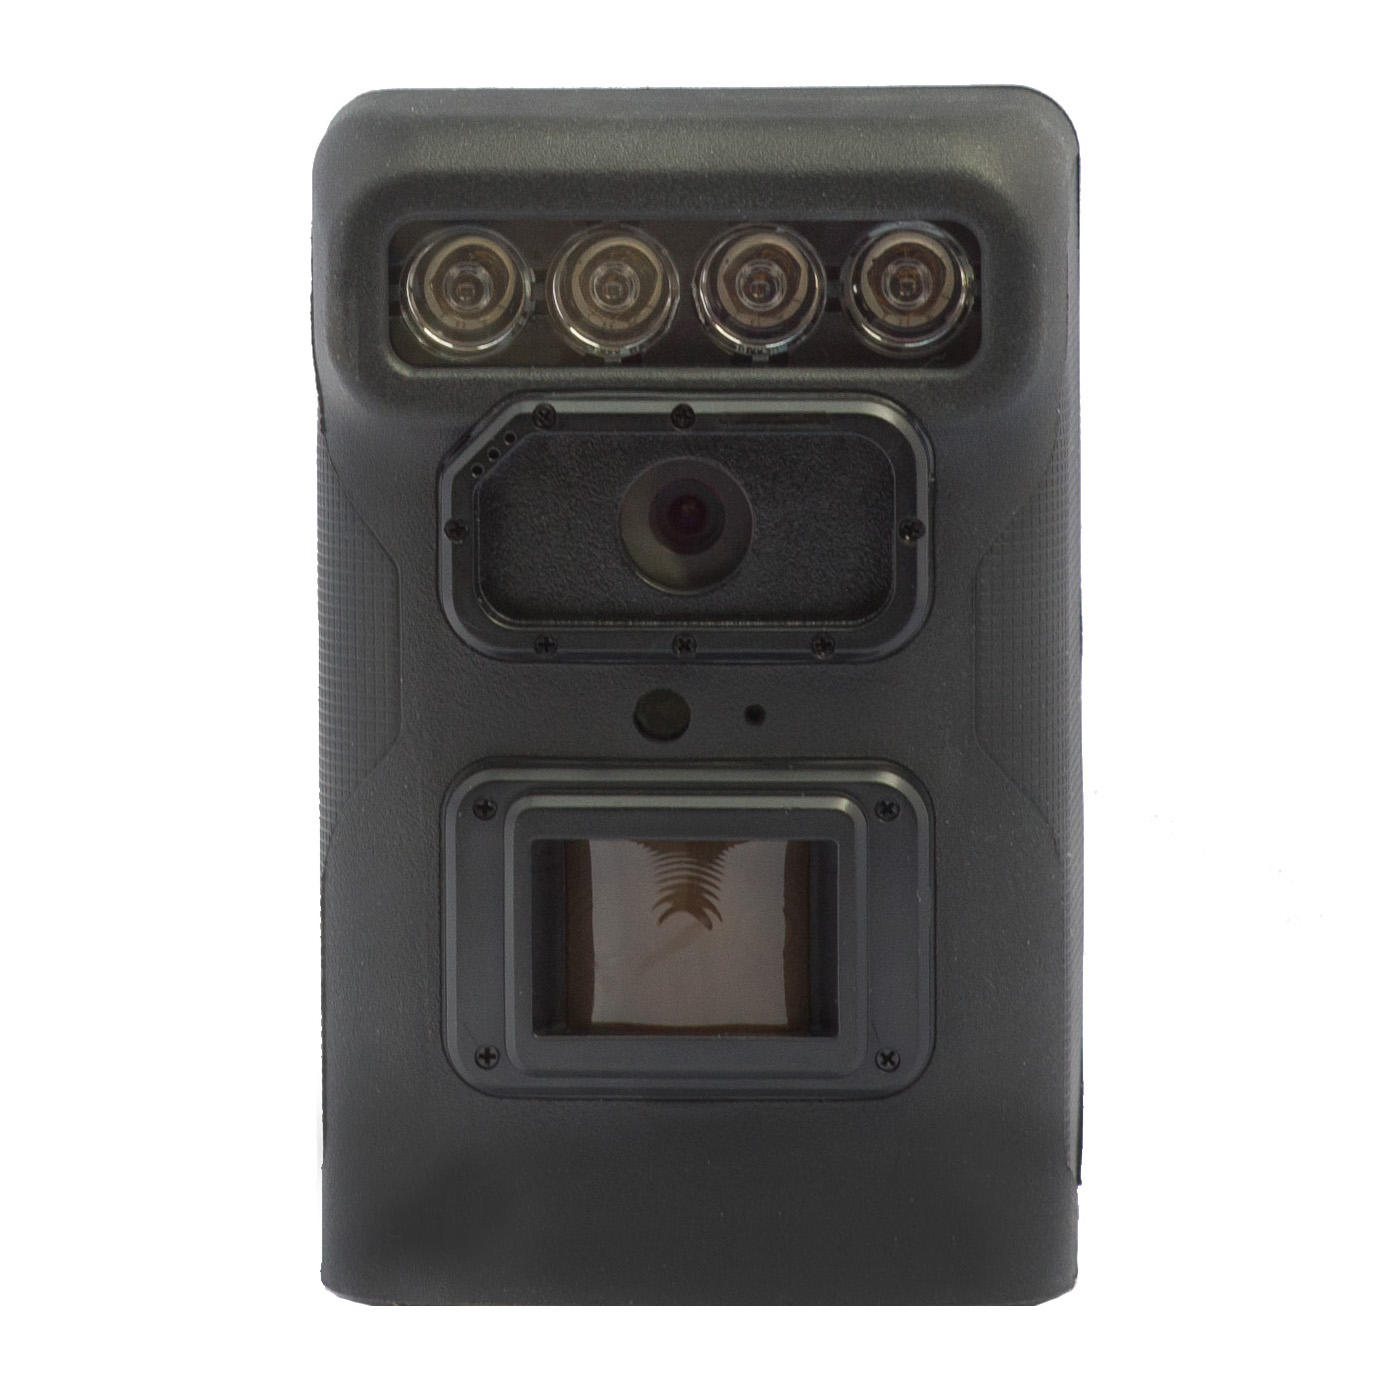 Browning Defender 850 Wifi/Bluetooth 20MP Trail Game Security Camera - BTC-9D - image 3 of 5